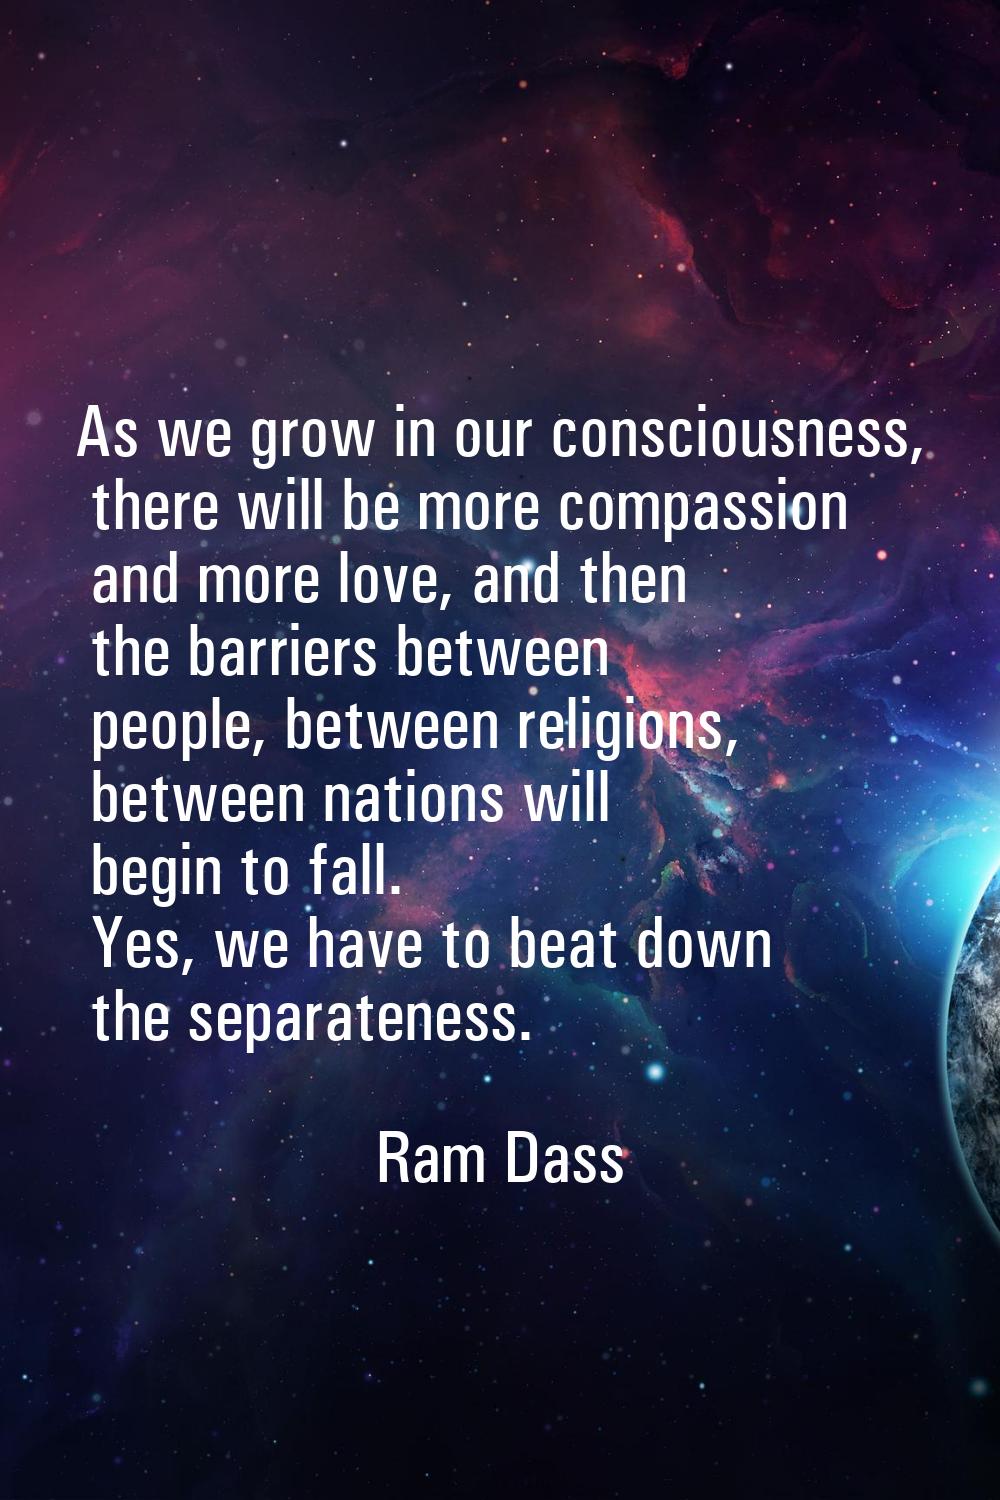 As we grow in our consciousness, there will be more compassion and more love, and then the barriers